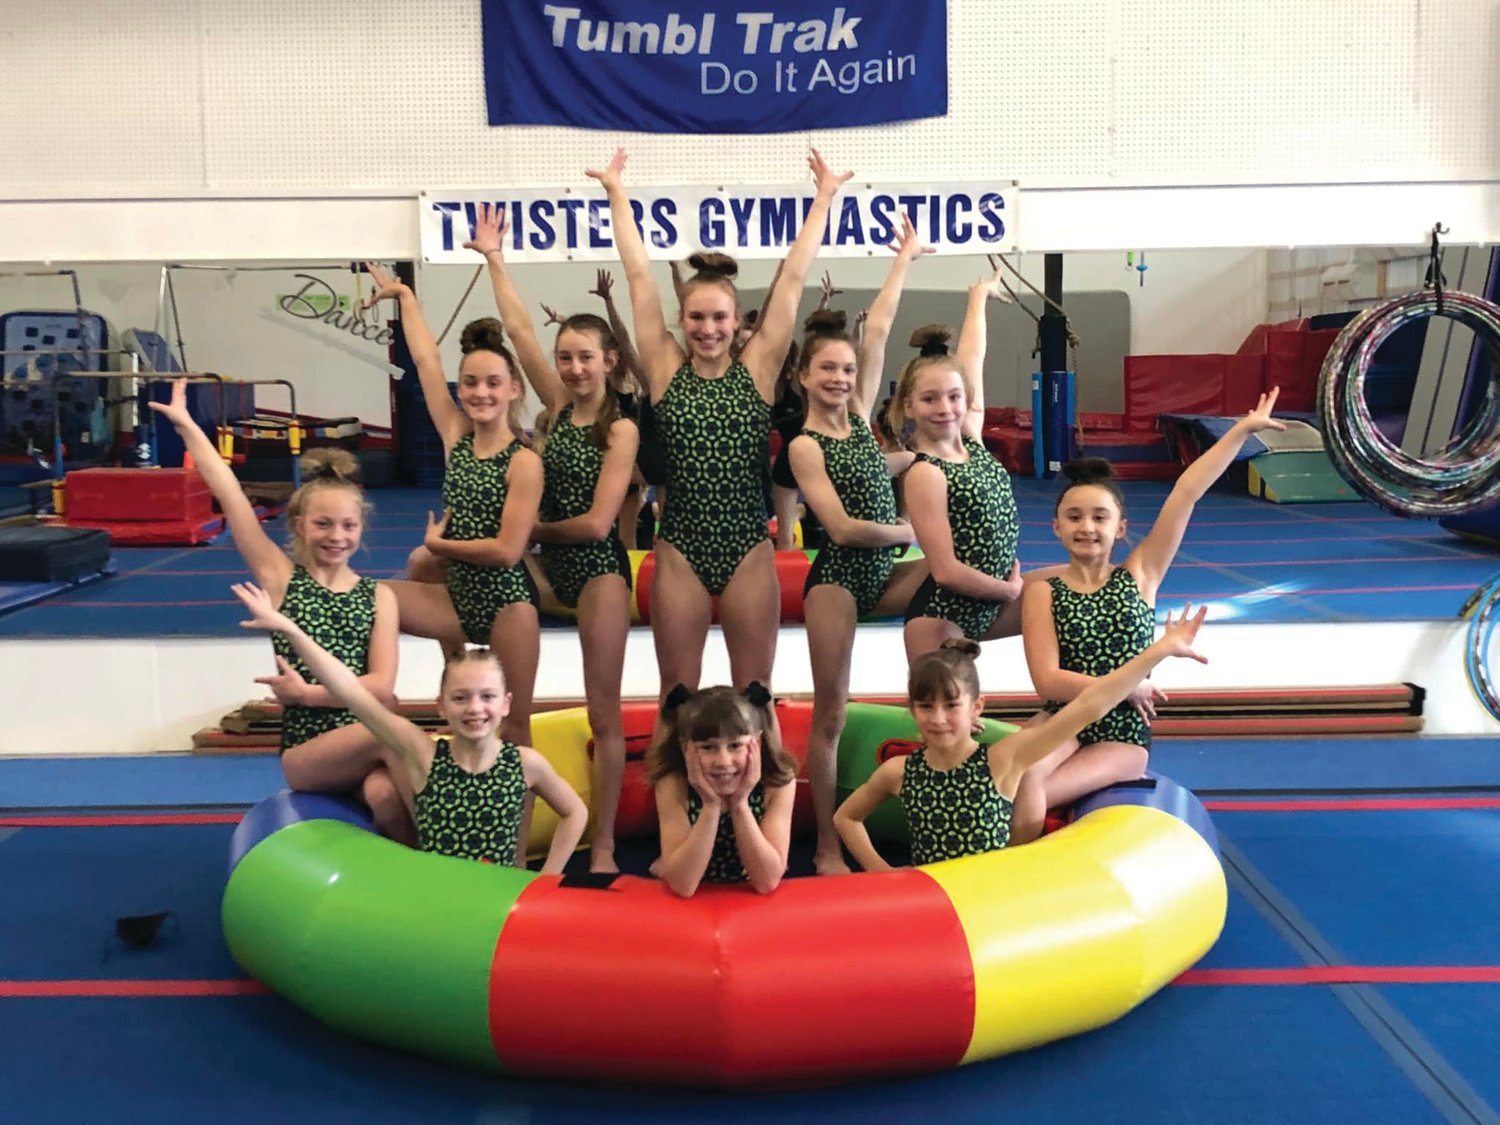 The “Twisters Sisters” Level 6 gymnastics team poses at their gym in Port Hadlock.